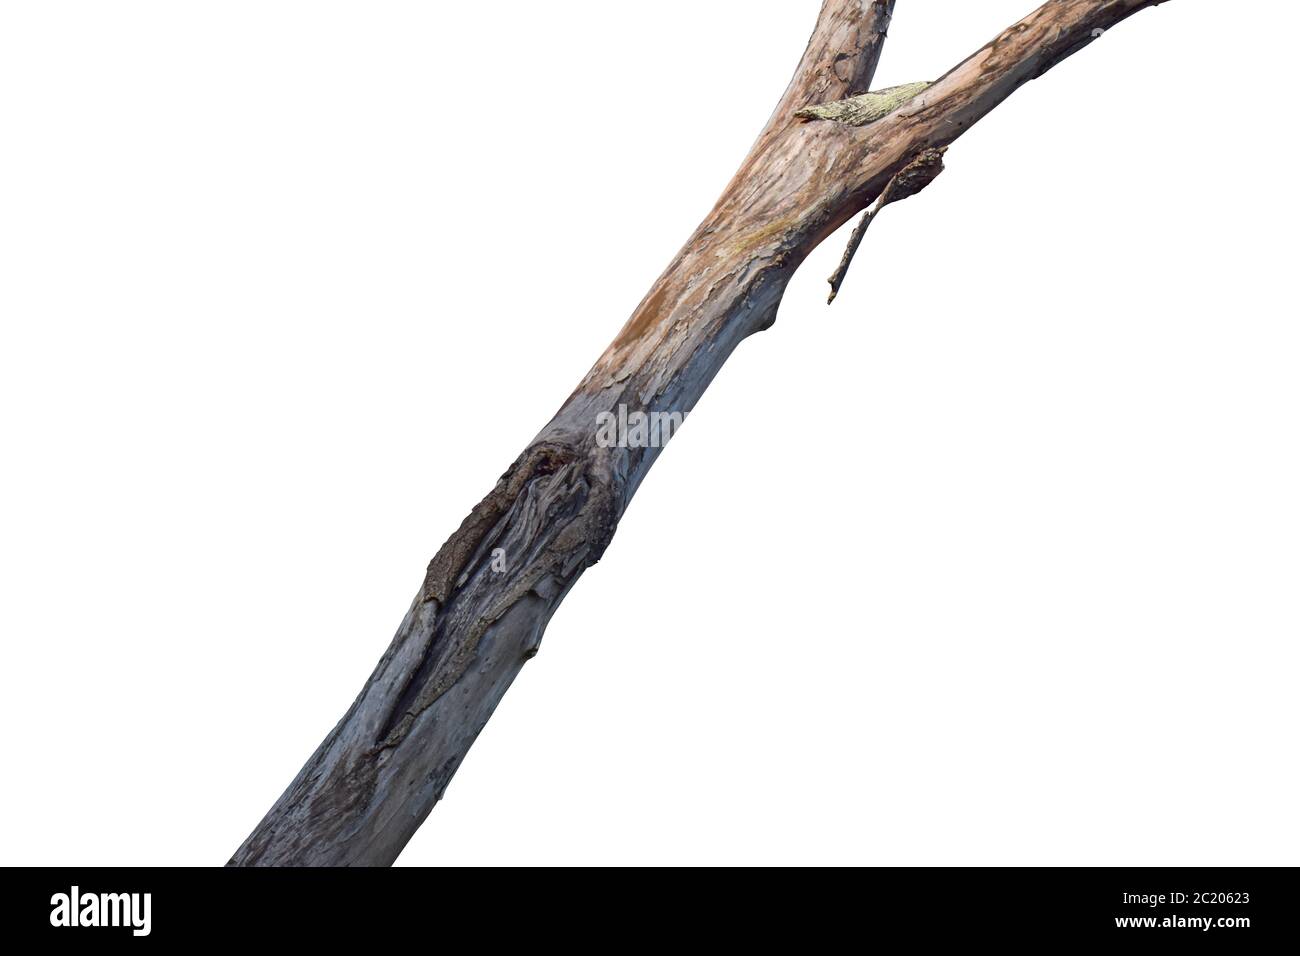 Dry tree branch isolated on white background. Object with clipping path. Stock Photo